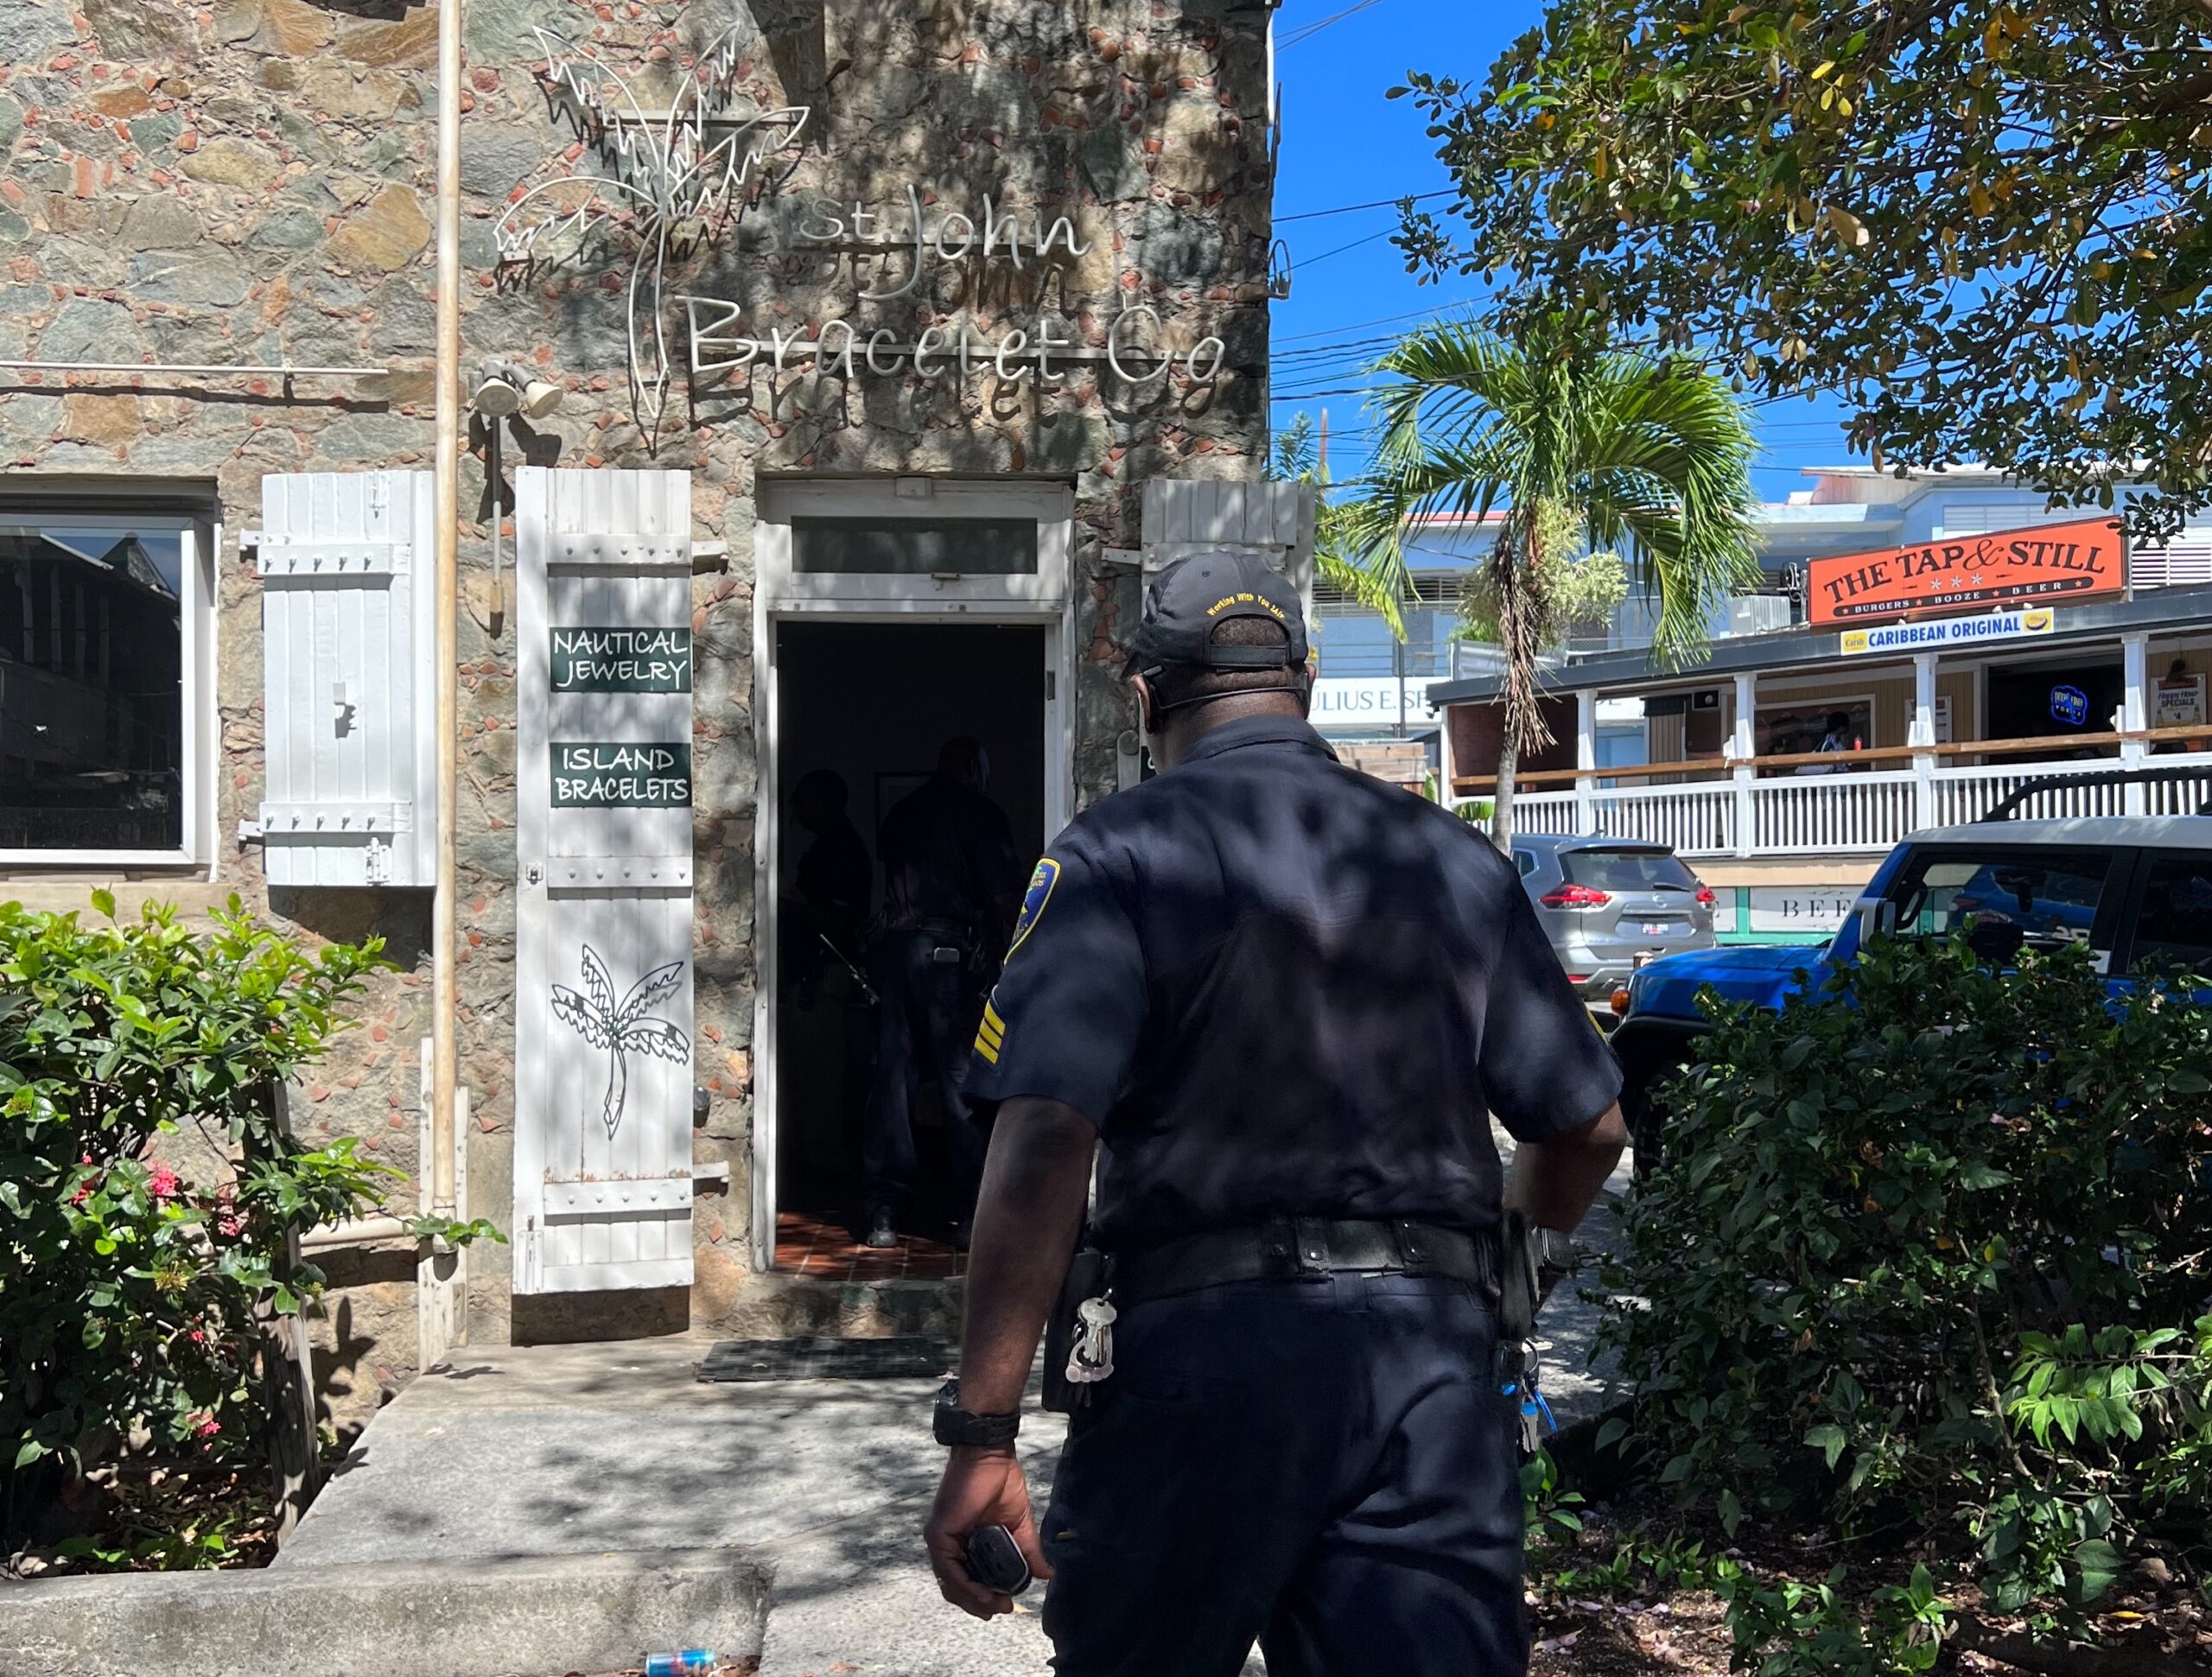 A V.I. Police officer investigates after the daylight robbery of the St. John Bracelet Co. in Cruz Bay on Thursday. (Submitted photo)